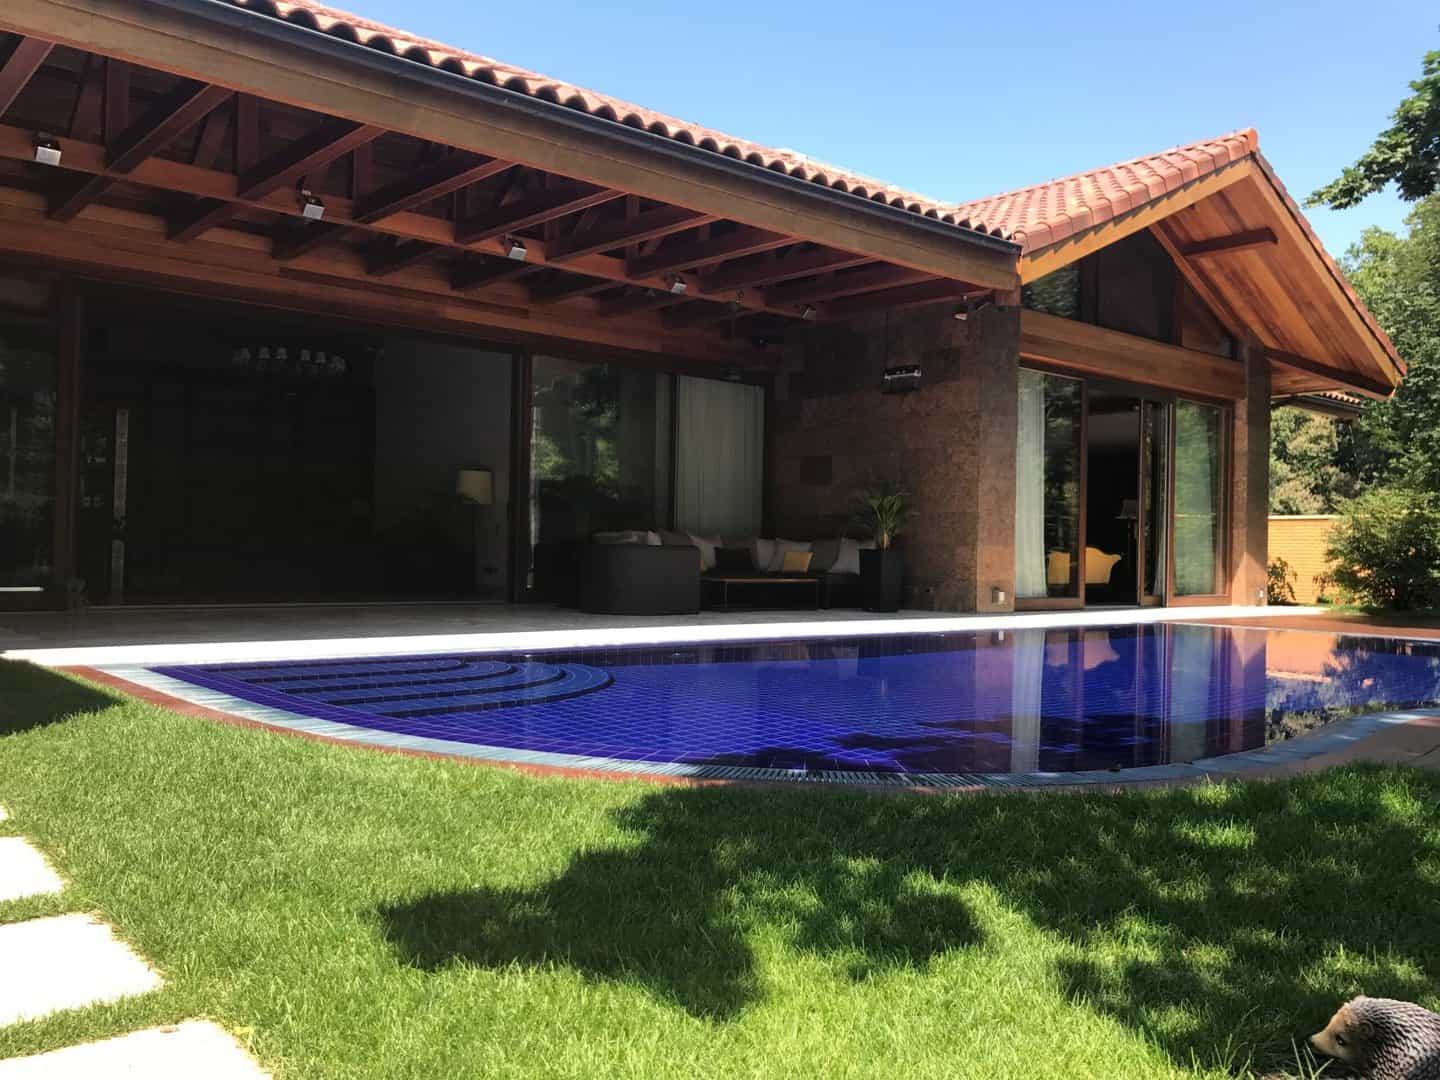 A Des Moines home with roof tiles and a pool in the yard.